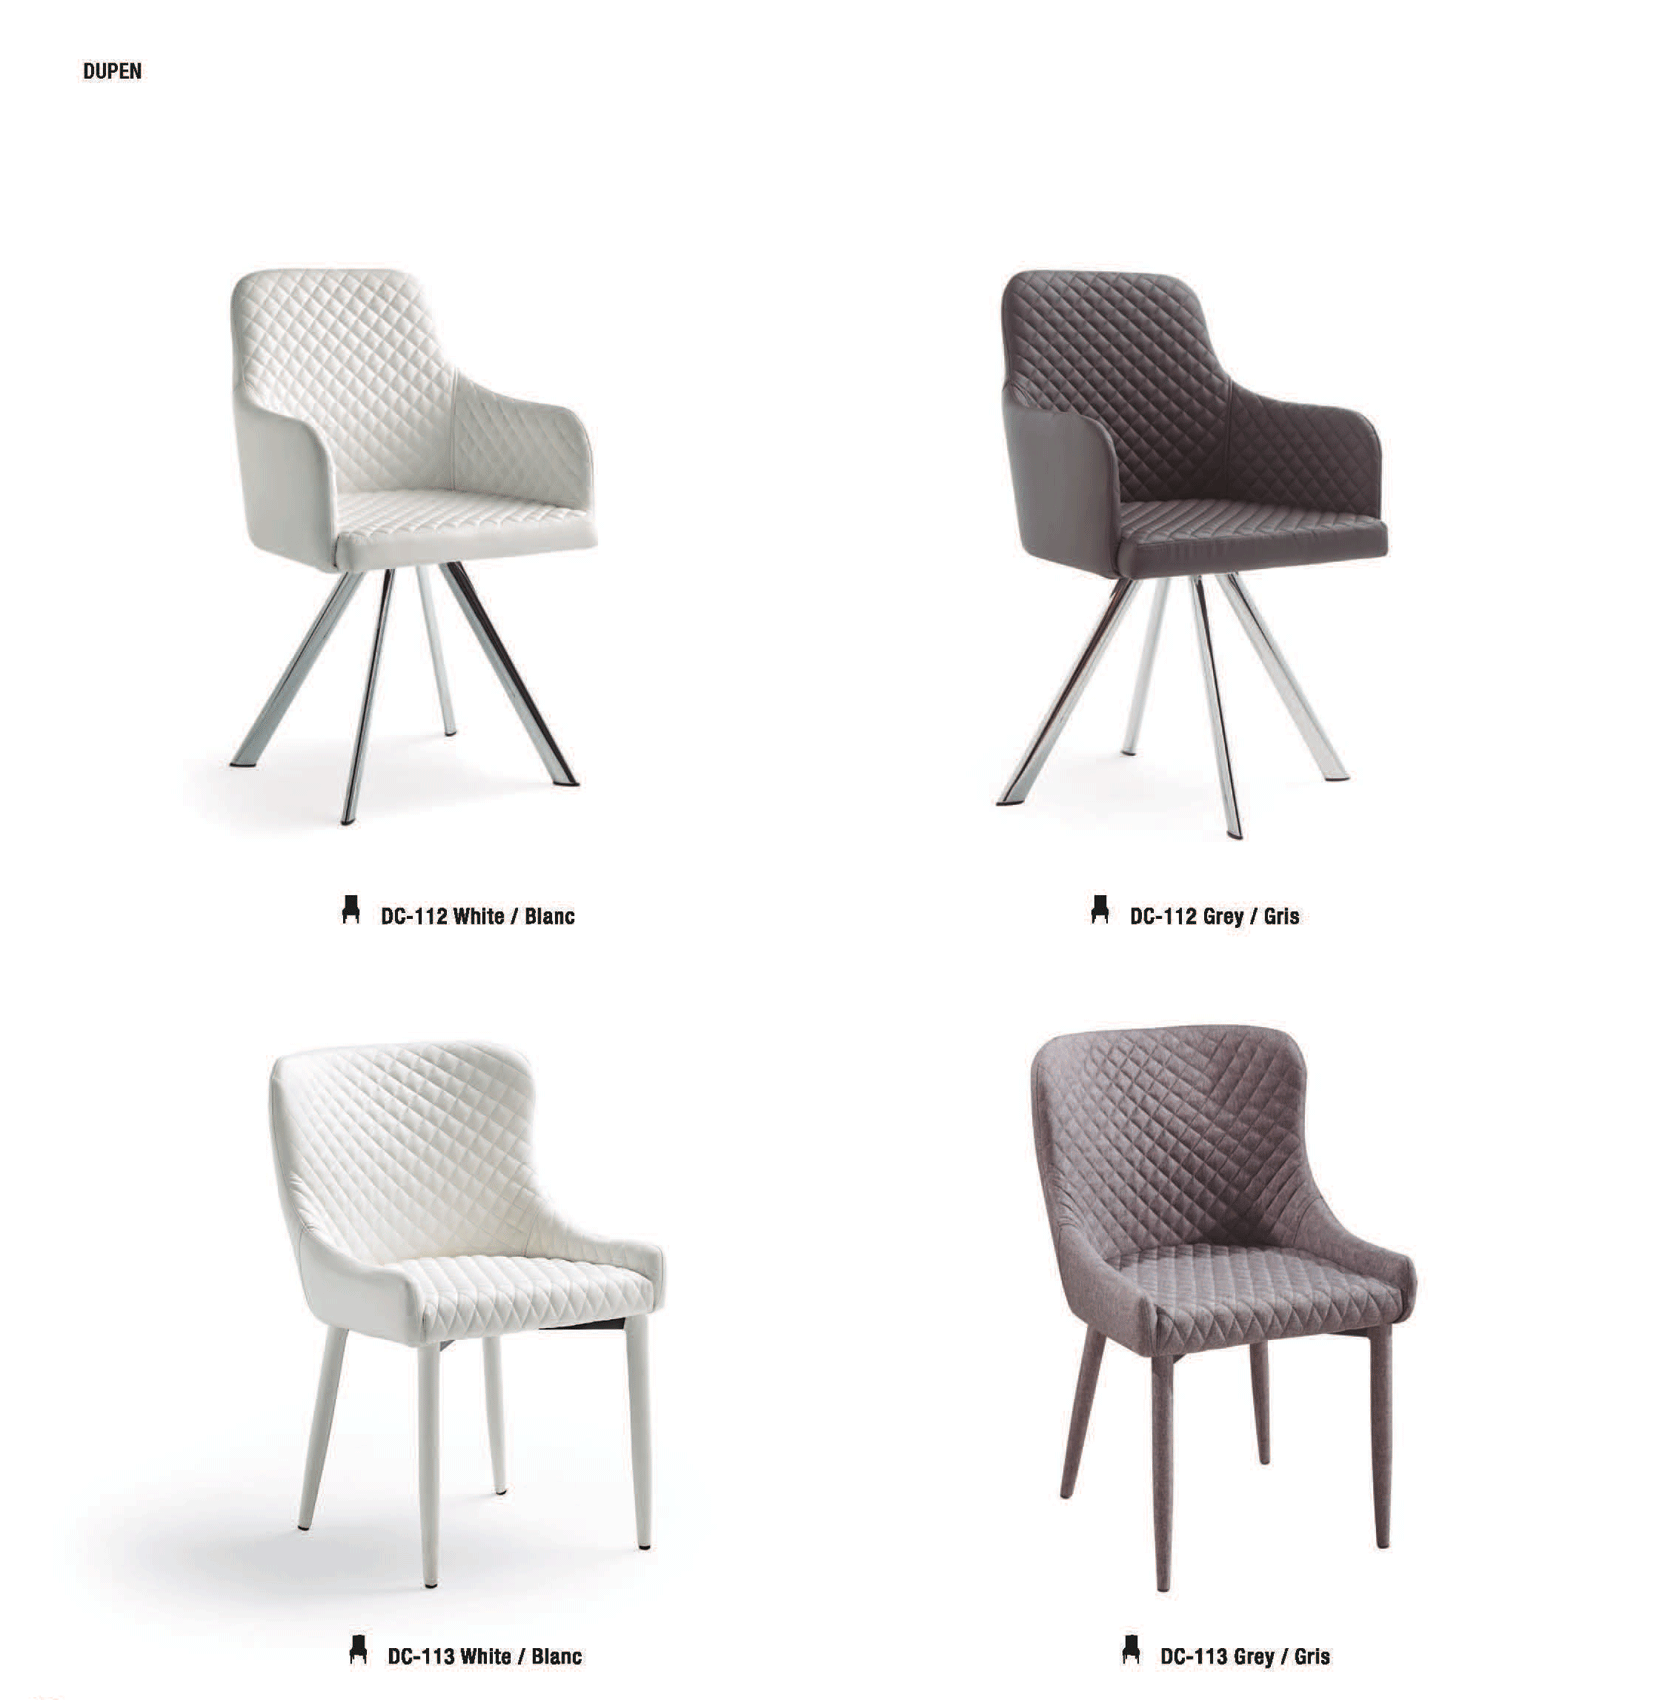 Brands Dupen Dining Rooms, Spain DC-112, DC-113 Chair